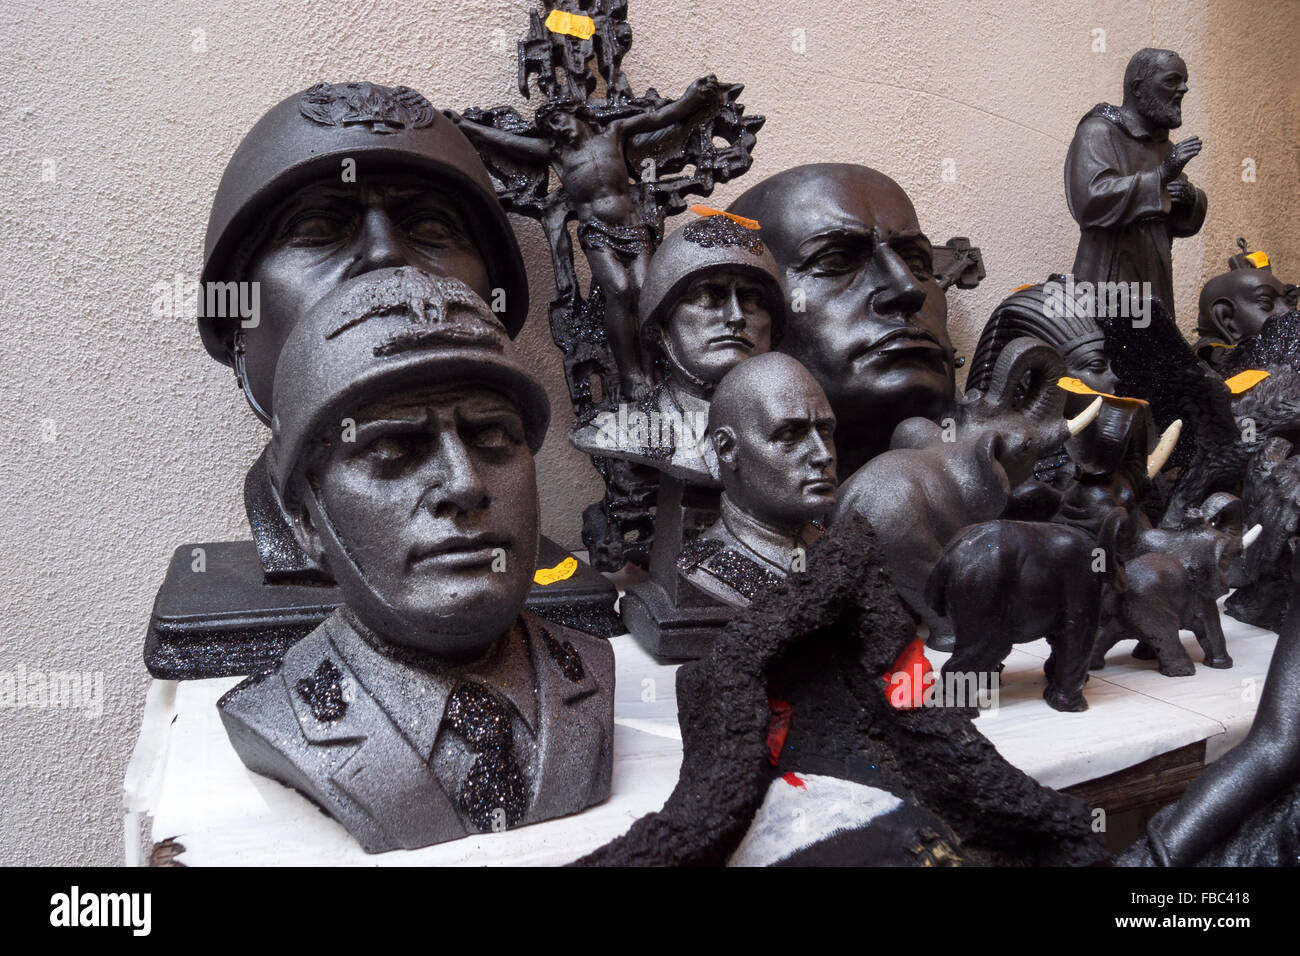 Statuettes of Benito Mussolini on sale at a street market Stock Photo -  Alamy